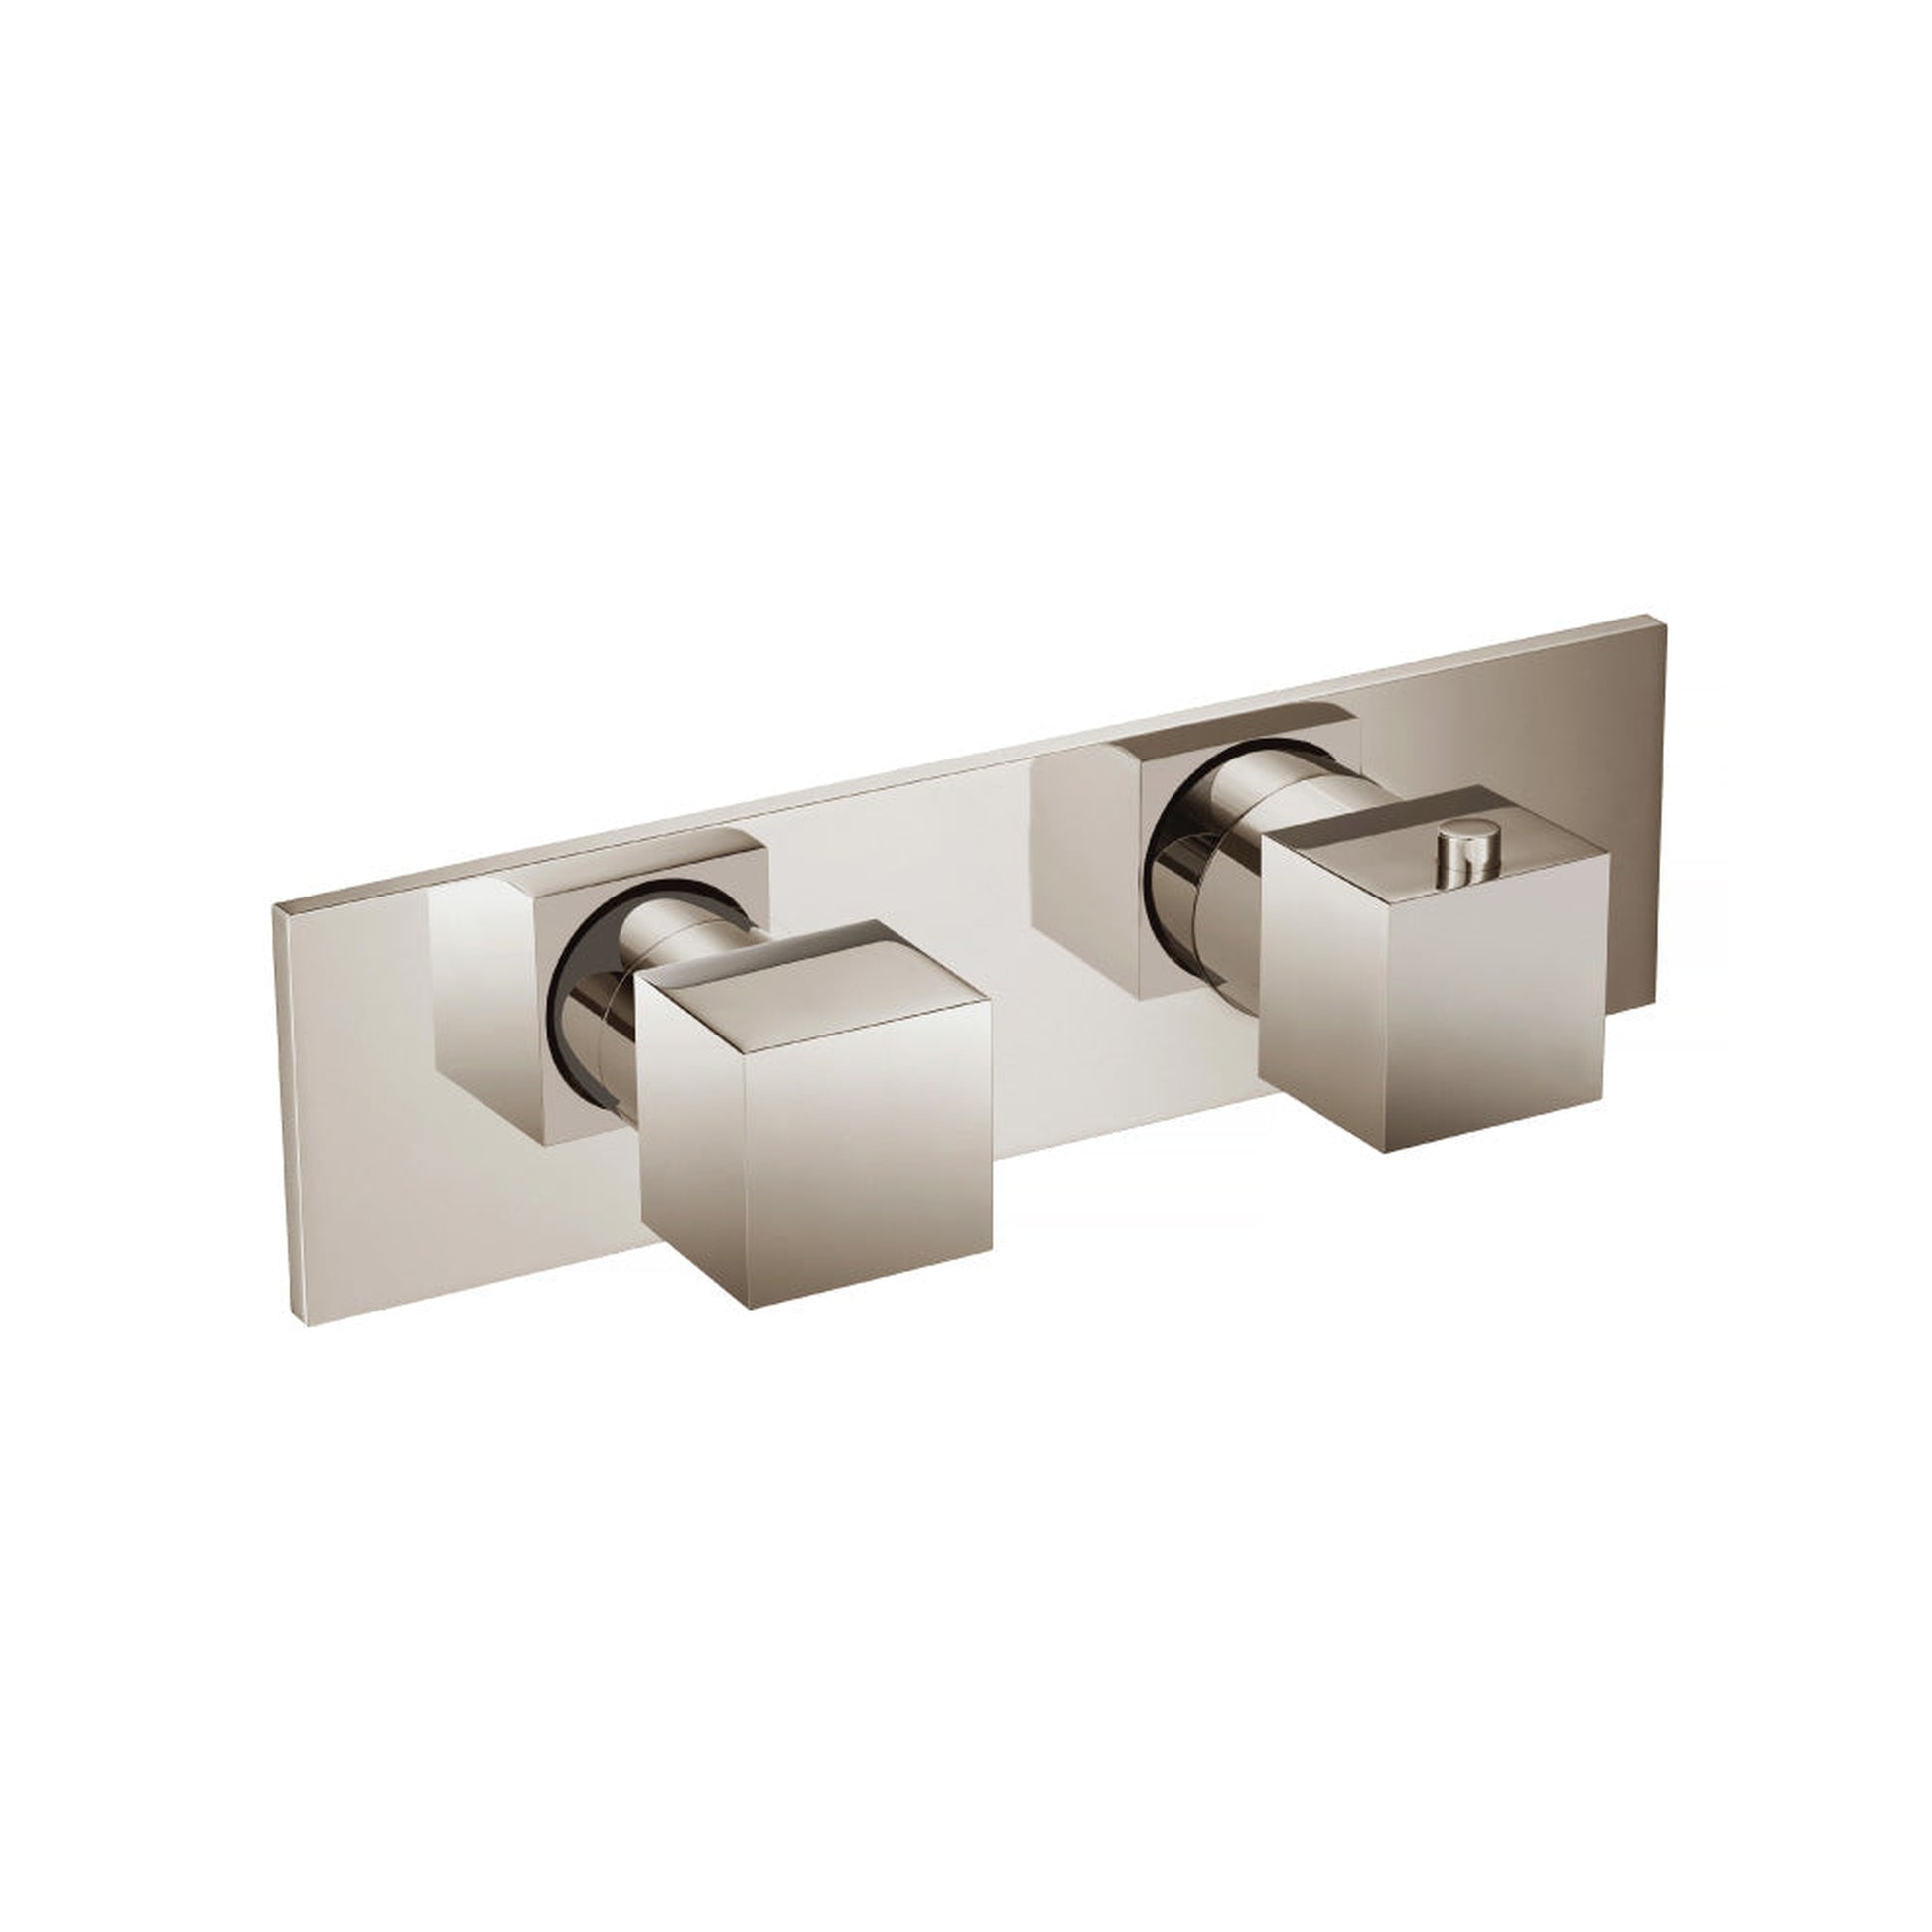 Isenberg Serie 160 Single Output Trim for Thermostatic Valve in Polished Nickel